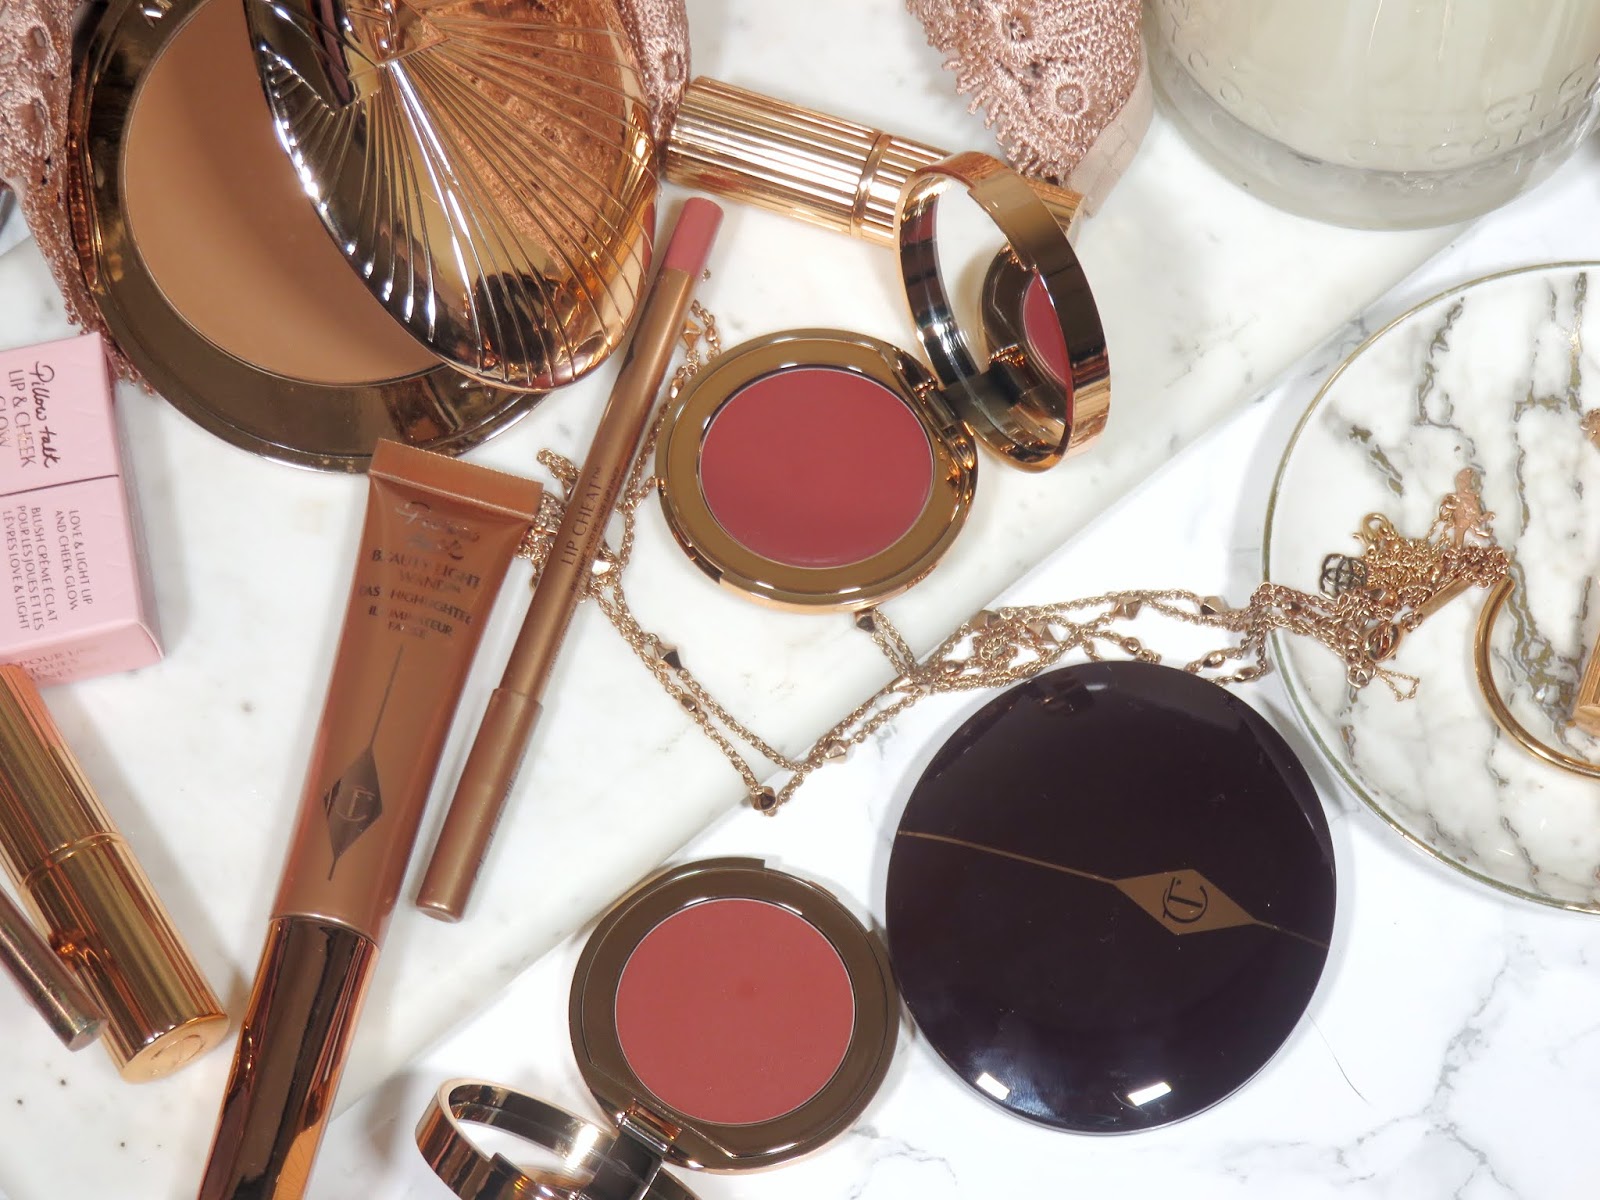 Charlotte Tilbury Pillow Talk Lip & Cheek Glow Review and Swatches